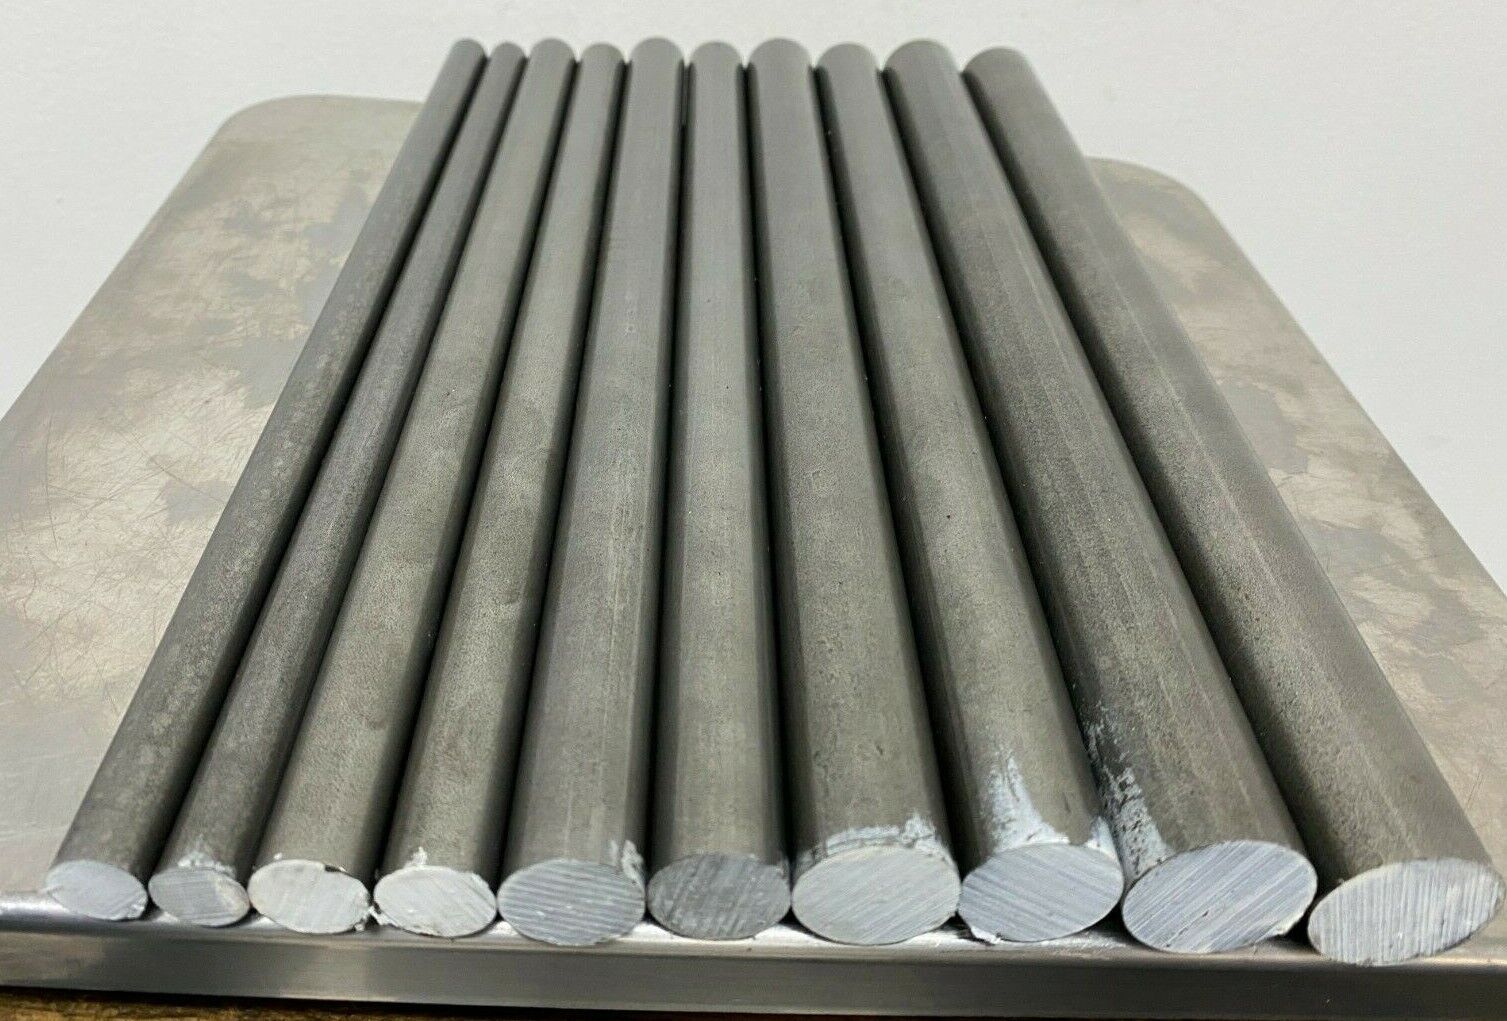 12L14 Steel Bar Stock Assortment 10 Round Bars See Description  Oakland Steel Inc. Does Not Apply